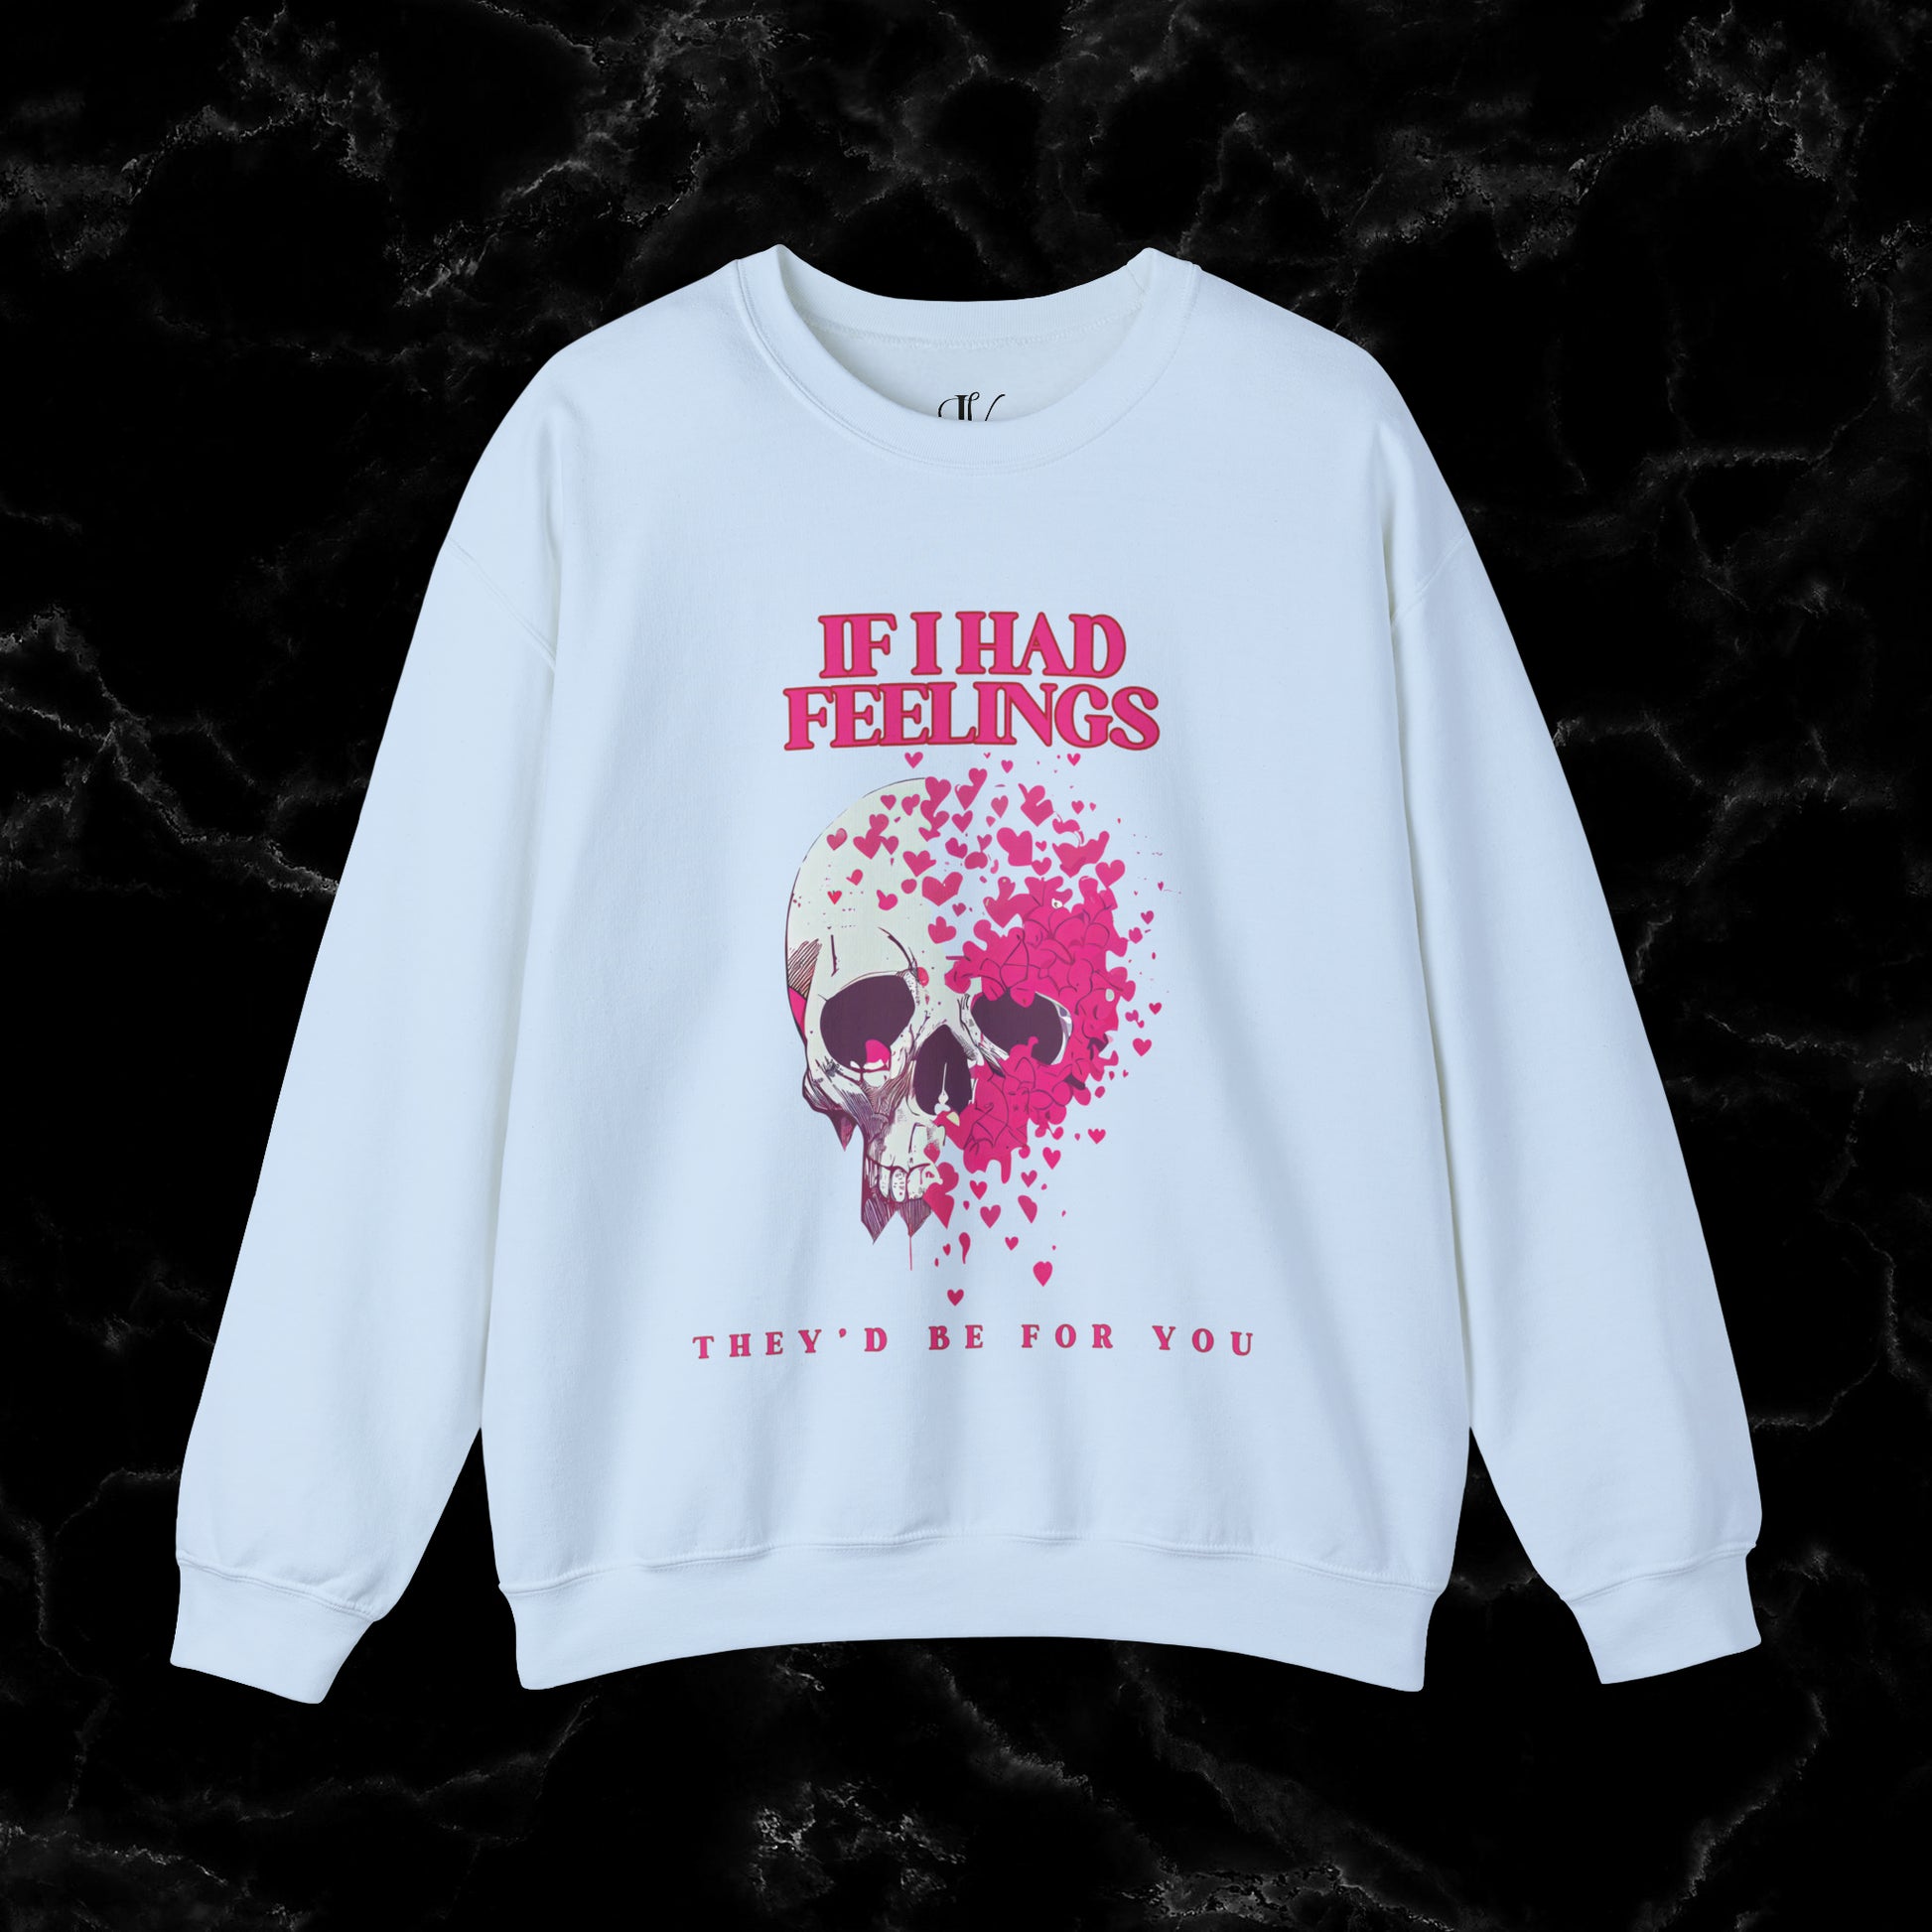 If I Had Feelings, They'd Be For You Sweatshirt - Skeleton Valentines Sweatshirt - Funny Valentines Sweater - Women's Valentines - Valentines Gift Sweatshirt S Light Blue 